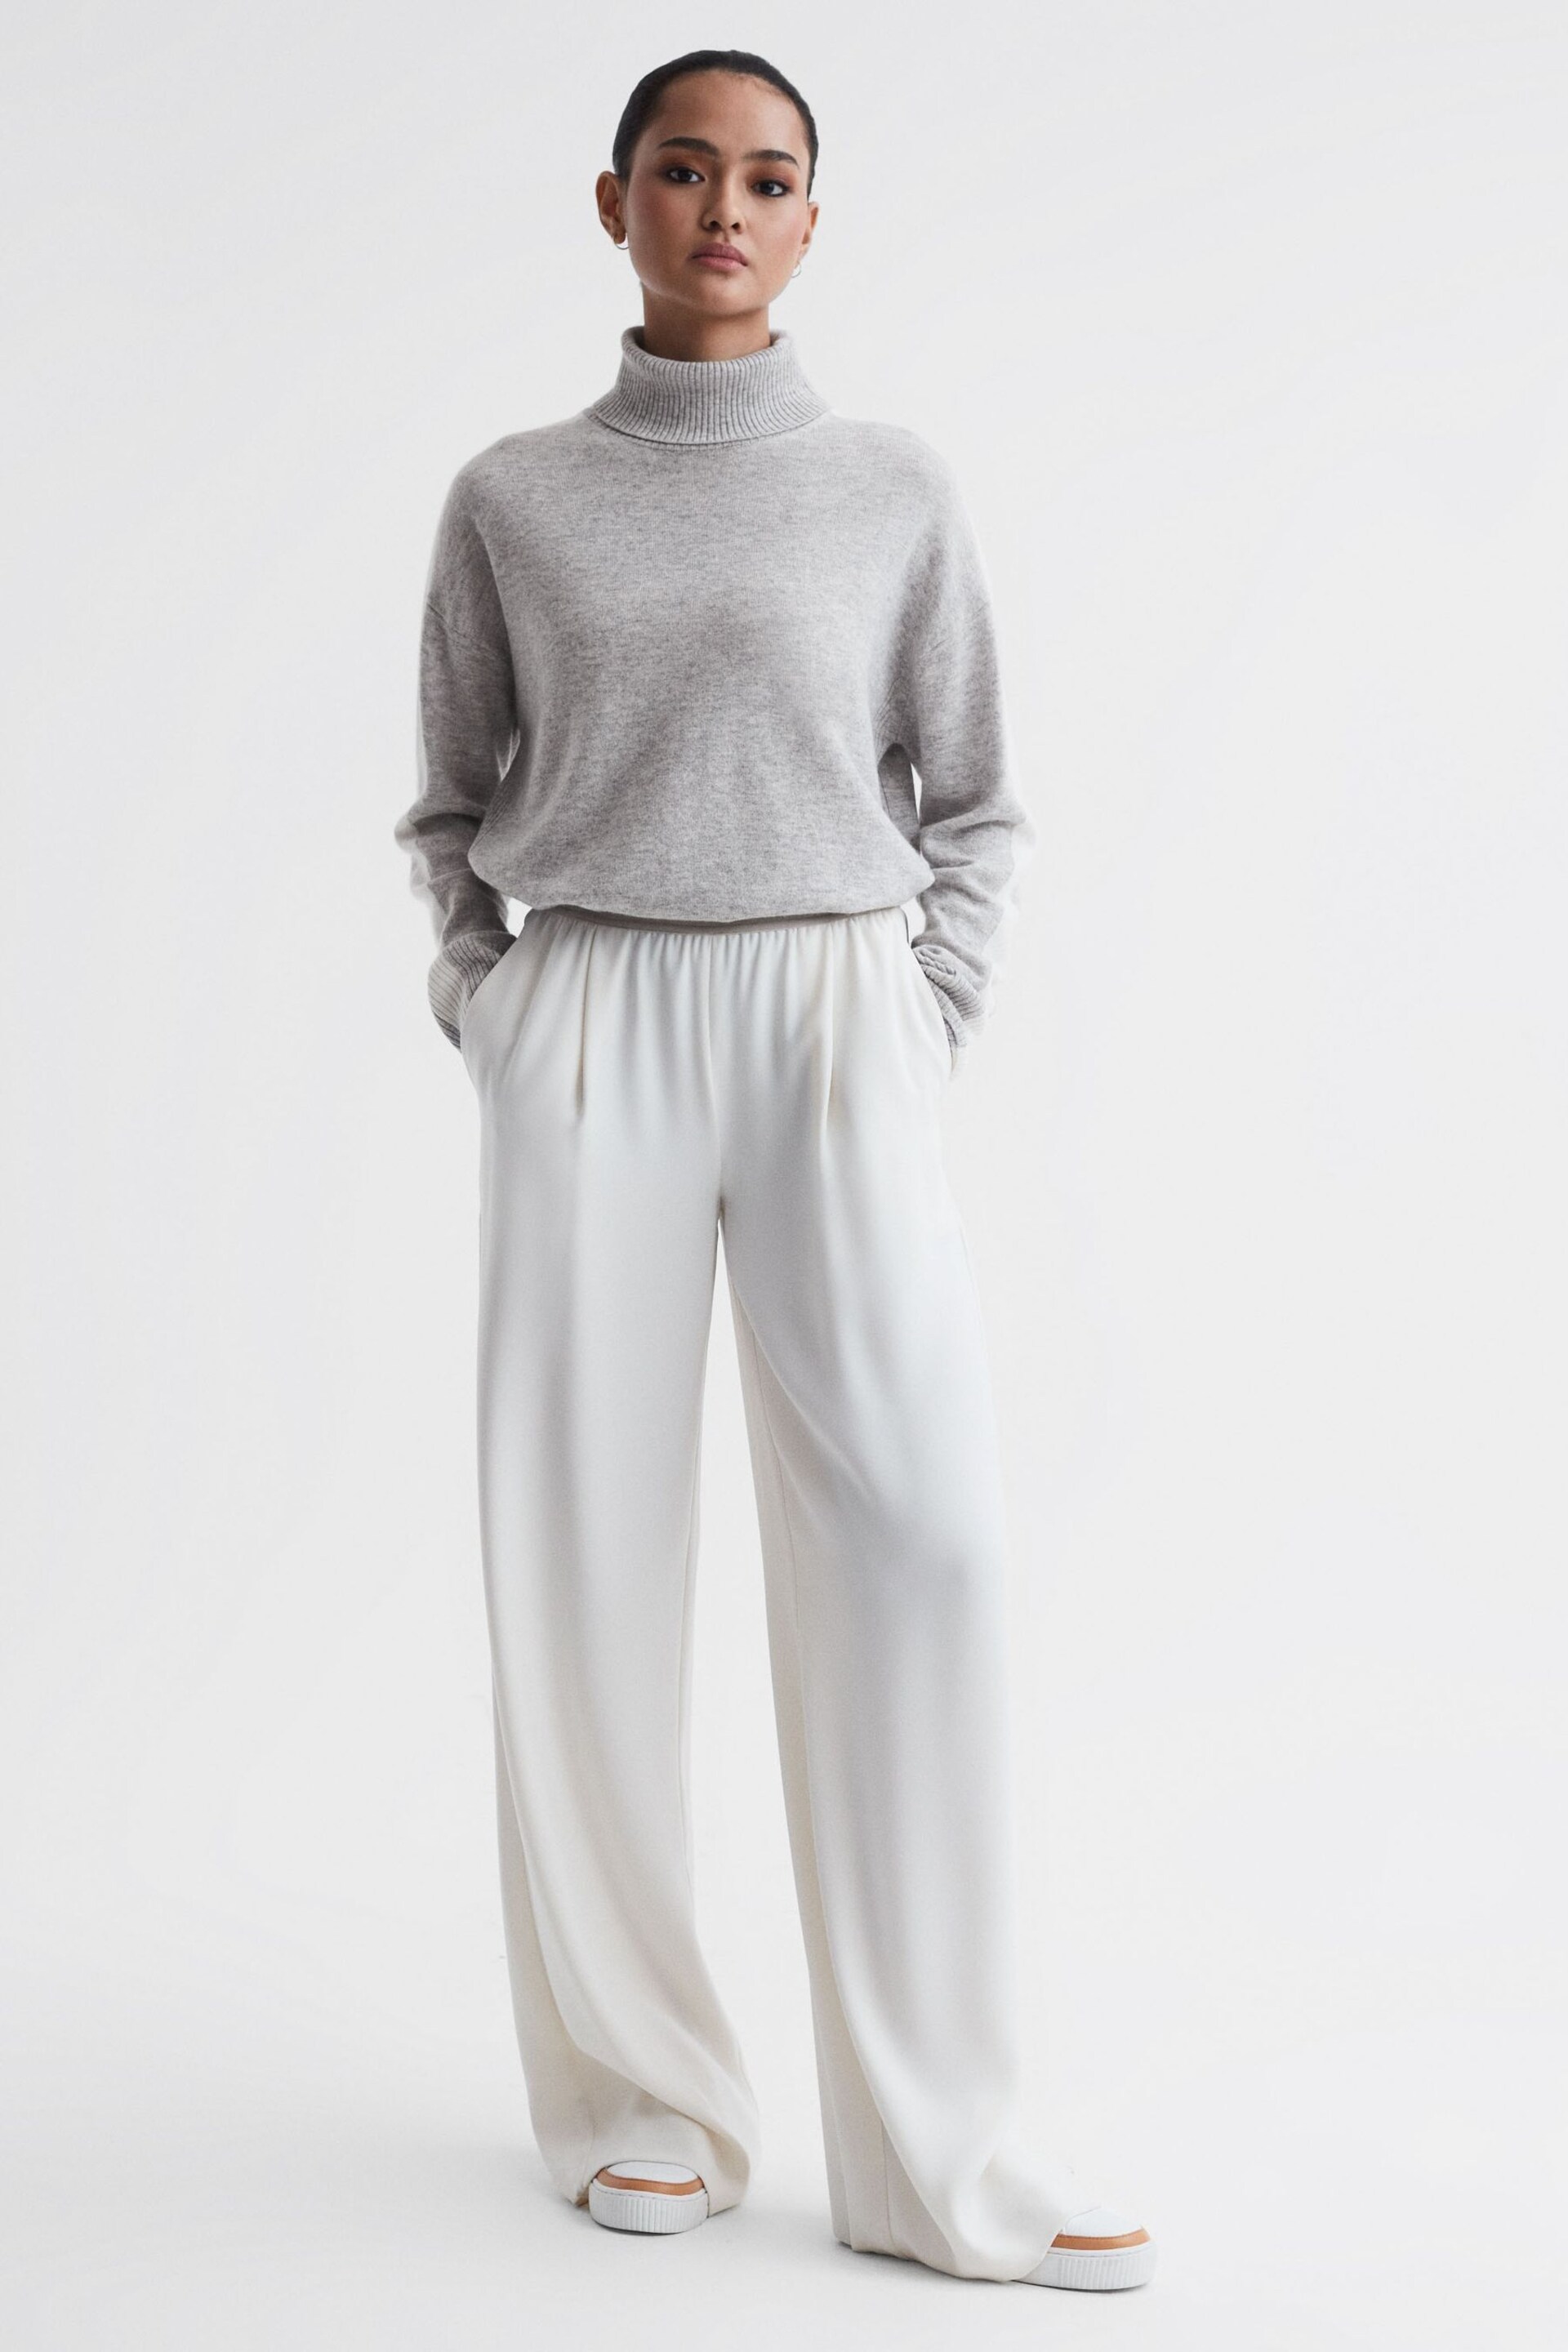 Reiss Grey/White Alexis Wool Blend Roll Neck Jumper - Image 3 of 5